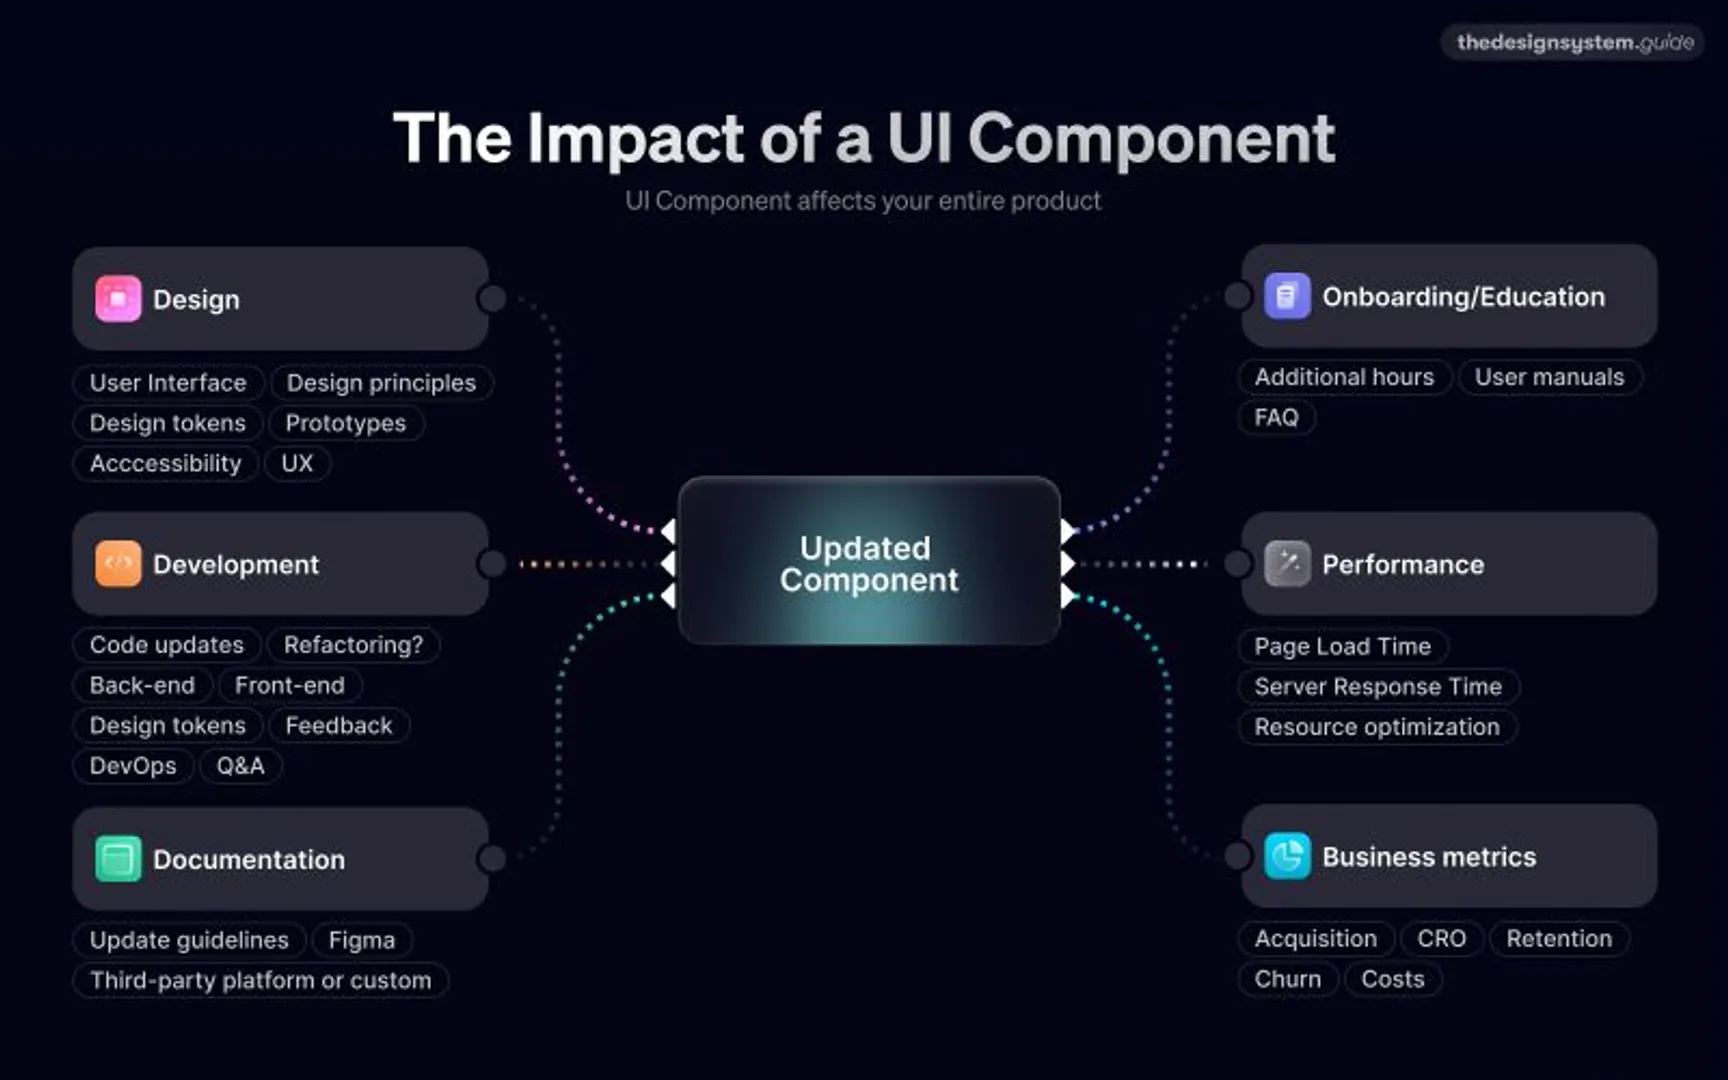 No change in the UI component is trivial. 🌟
Imagine a conversion rate with a broken input field or unreadable buttons. 💥💥 Oops, not so good.

Let's visualize the impact of changing a single UI component. It can be enormous because it affects:

Design
** User Interface Design
** Design Principles
** Design tokens
** Prototypes
** Accessibility
** UX

Development
** Code updates
** Refactoring
** Back-end
** Front-end
** Design tokens
** Feedback
** DevOps
** Q&A

Documentation
** Updating guidelines

Onboarding/Education
** Additional hours
** FAQ
** User manuals

Performance
** Page Load Time
** Server Response Time
** Resource optimization

Business metrics
** Acquisition
** Conversion rate
** Retention
** Costs

Yep, "little twikies" are not so cheap ... 💸

#productdesign #designsystem #productstrategy #productmanagement